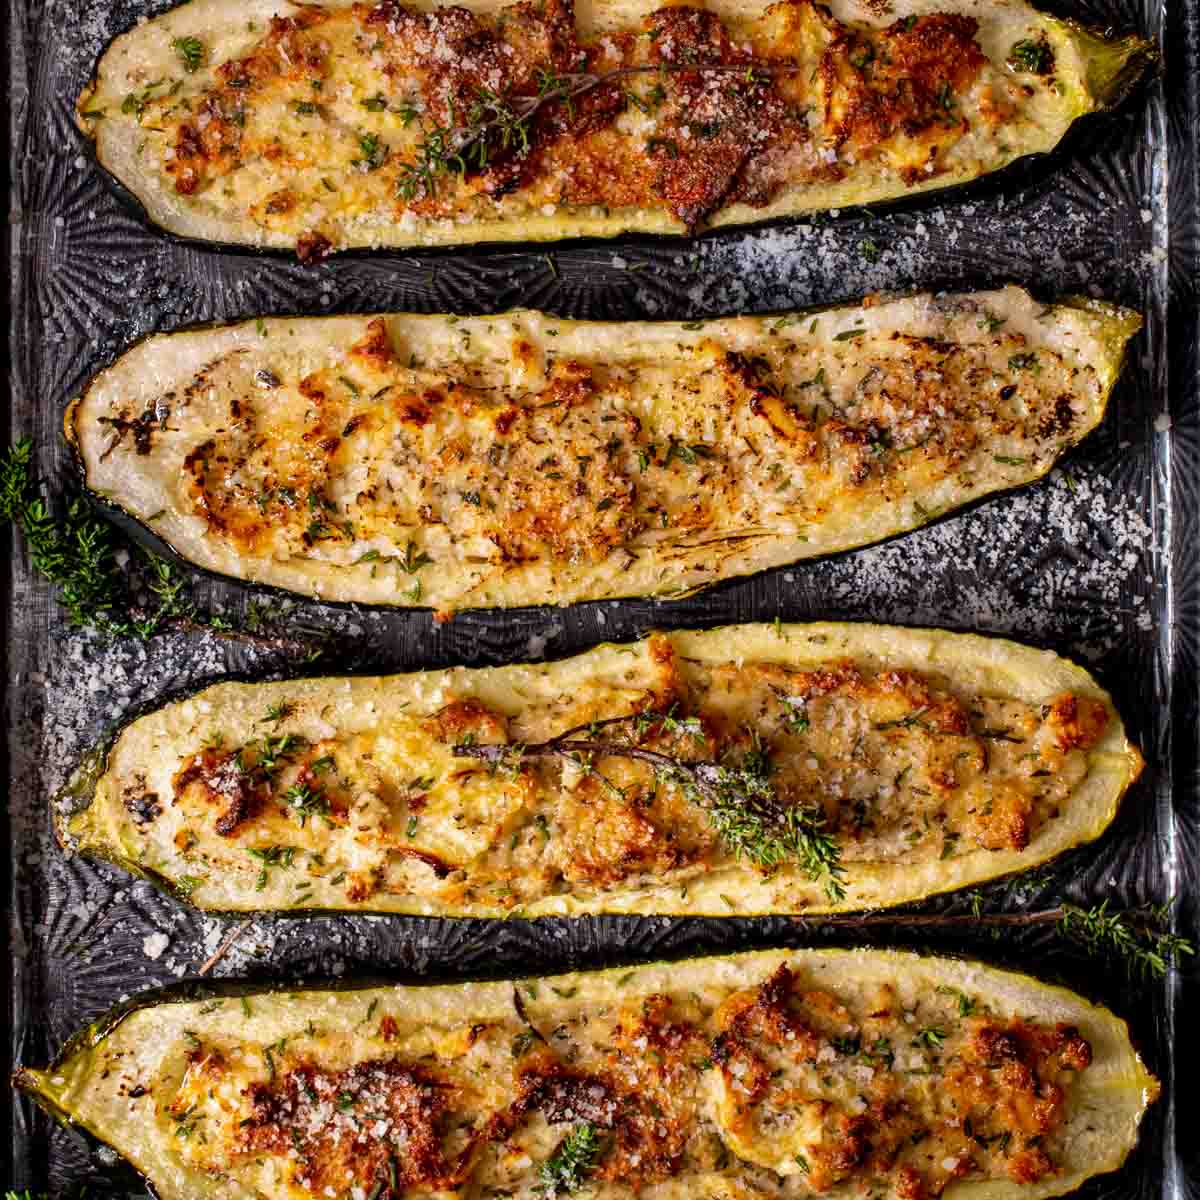 Stuffed zucchini boats that are golden brown and crispy on top.